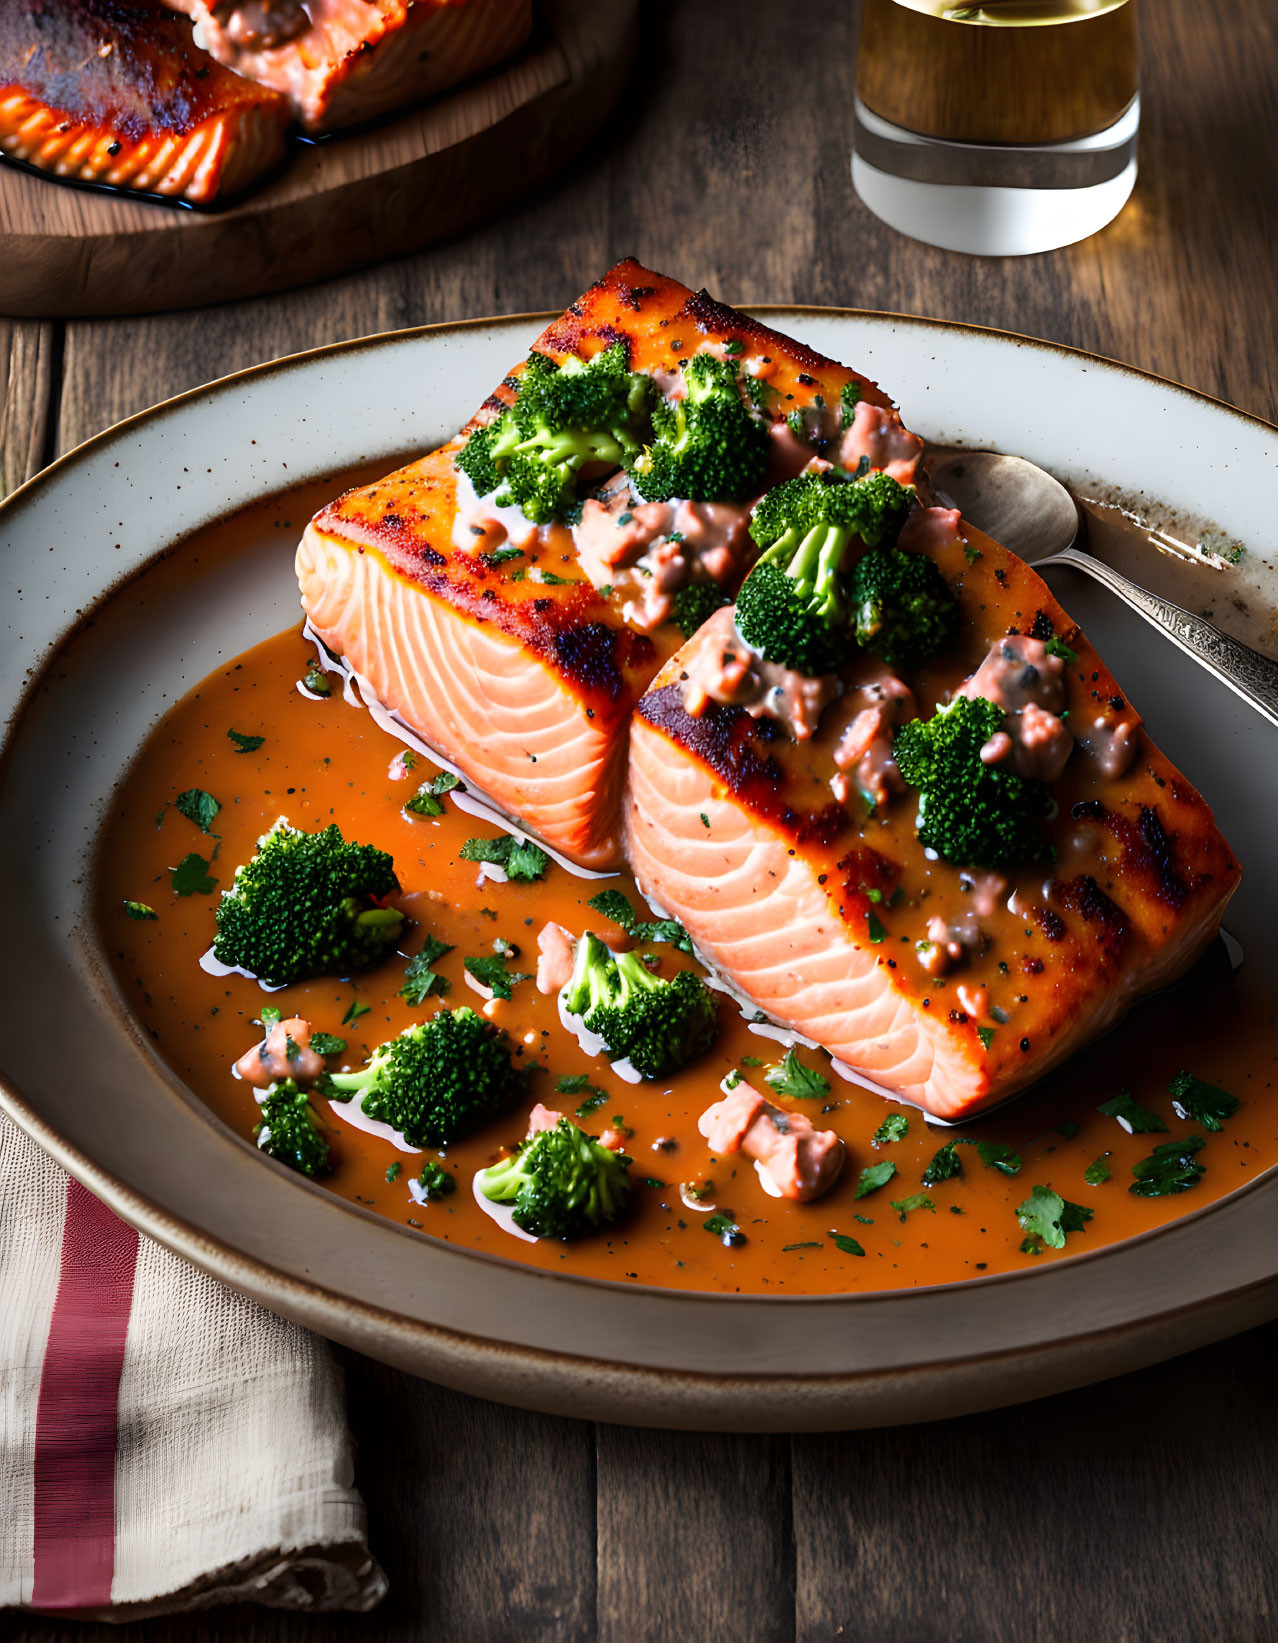 Grilled salmon fillets with creamy sauce and broccoli on white plate, white wine in background